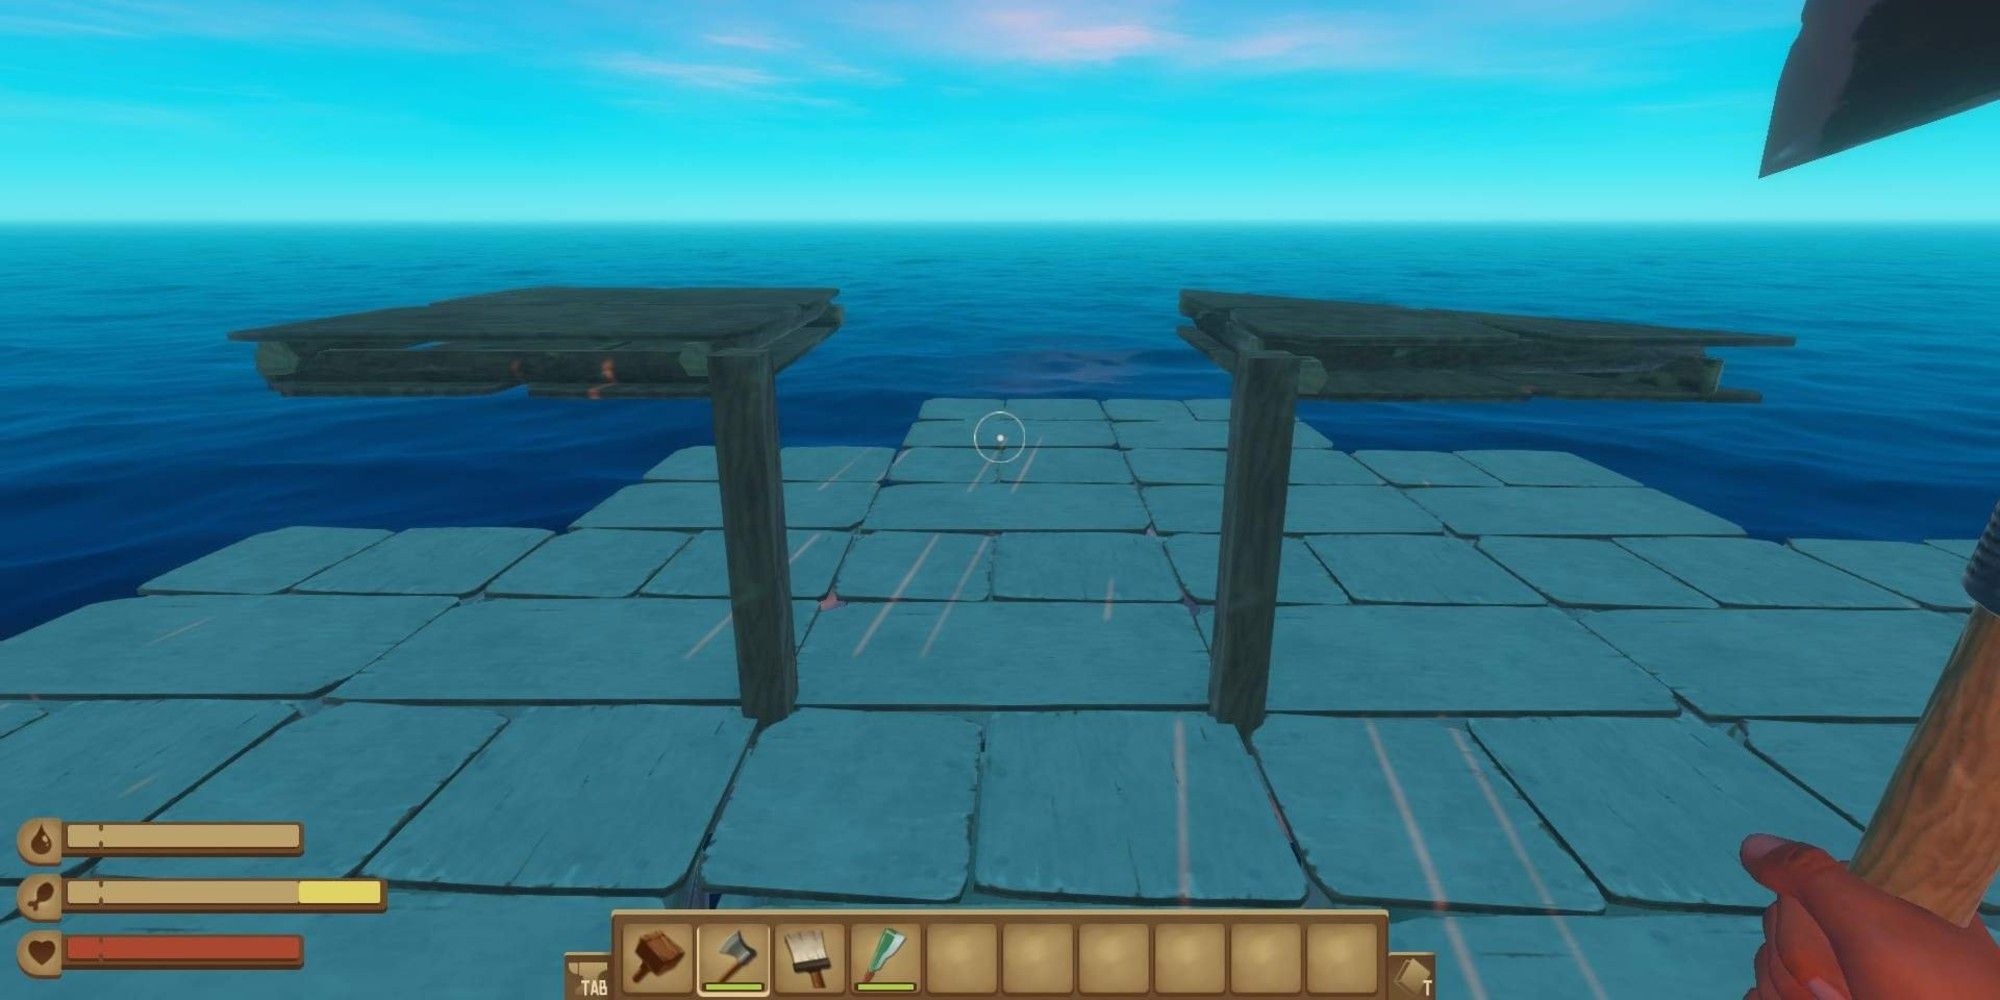 Players can use an exploit to build floating floors to their rafts in either survival or creative mode in Raft